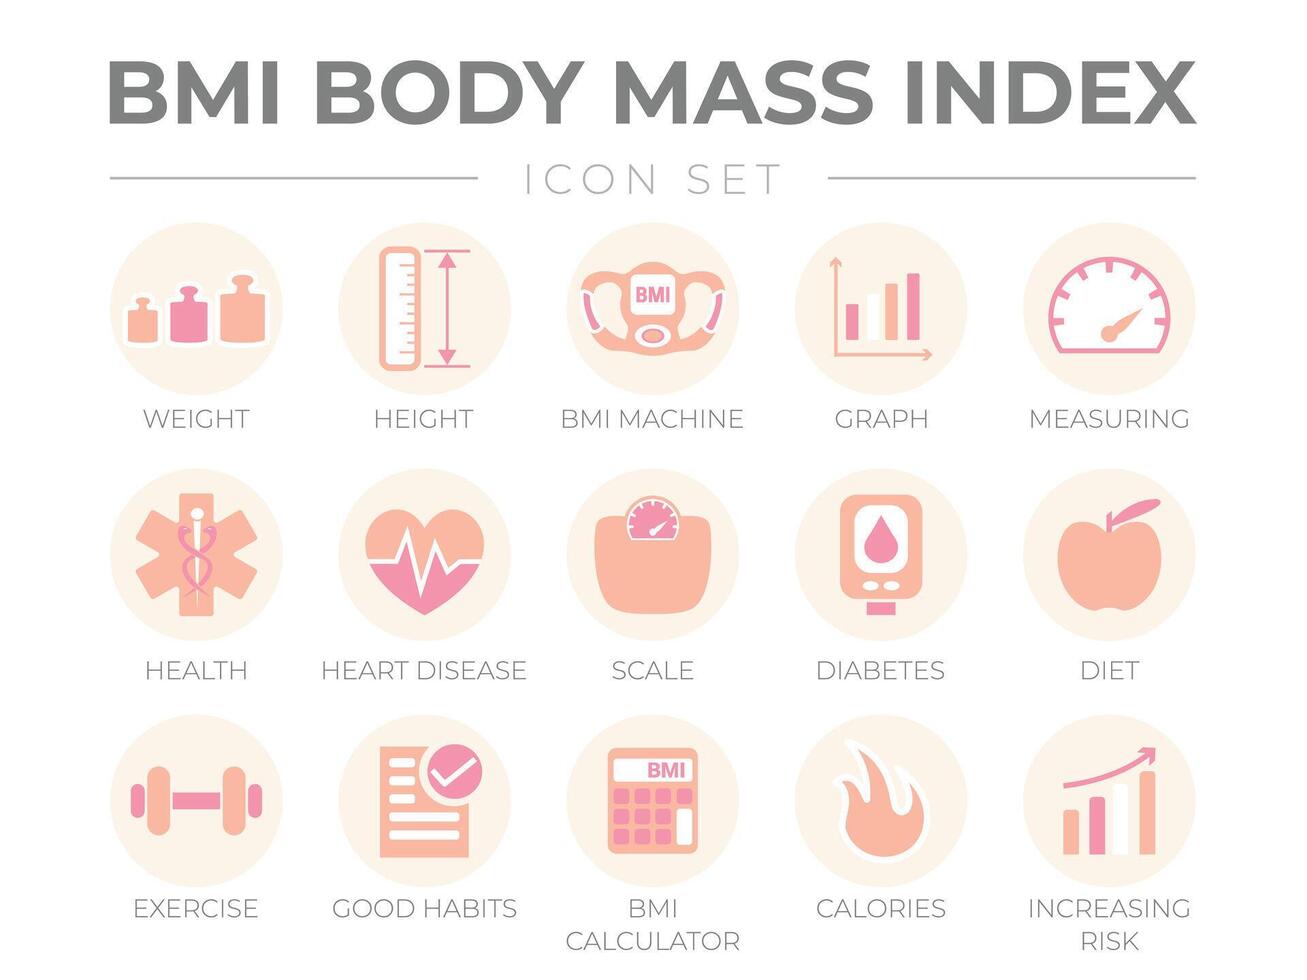 BMI Body Mass Index Round Outline Icon Set of Weight, Height, BMI Machine, Graph, Measuring, Health, Heart Disease, Scale, Diabetes, Diet, Exercise, Habits, BMI Calculator, Calories, Risk Icons vector